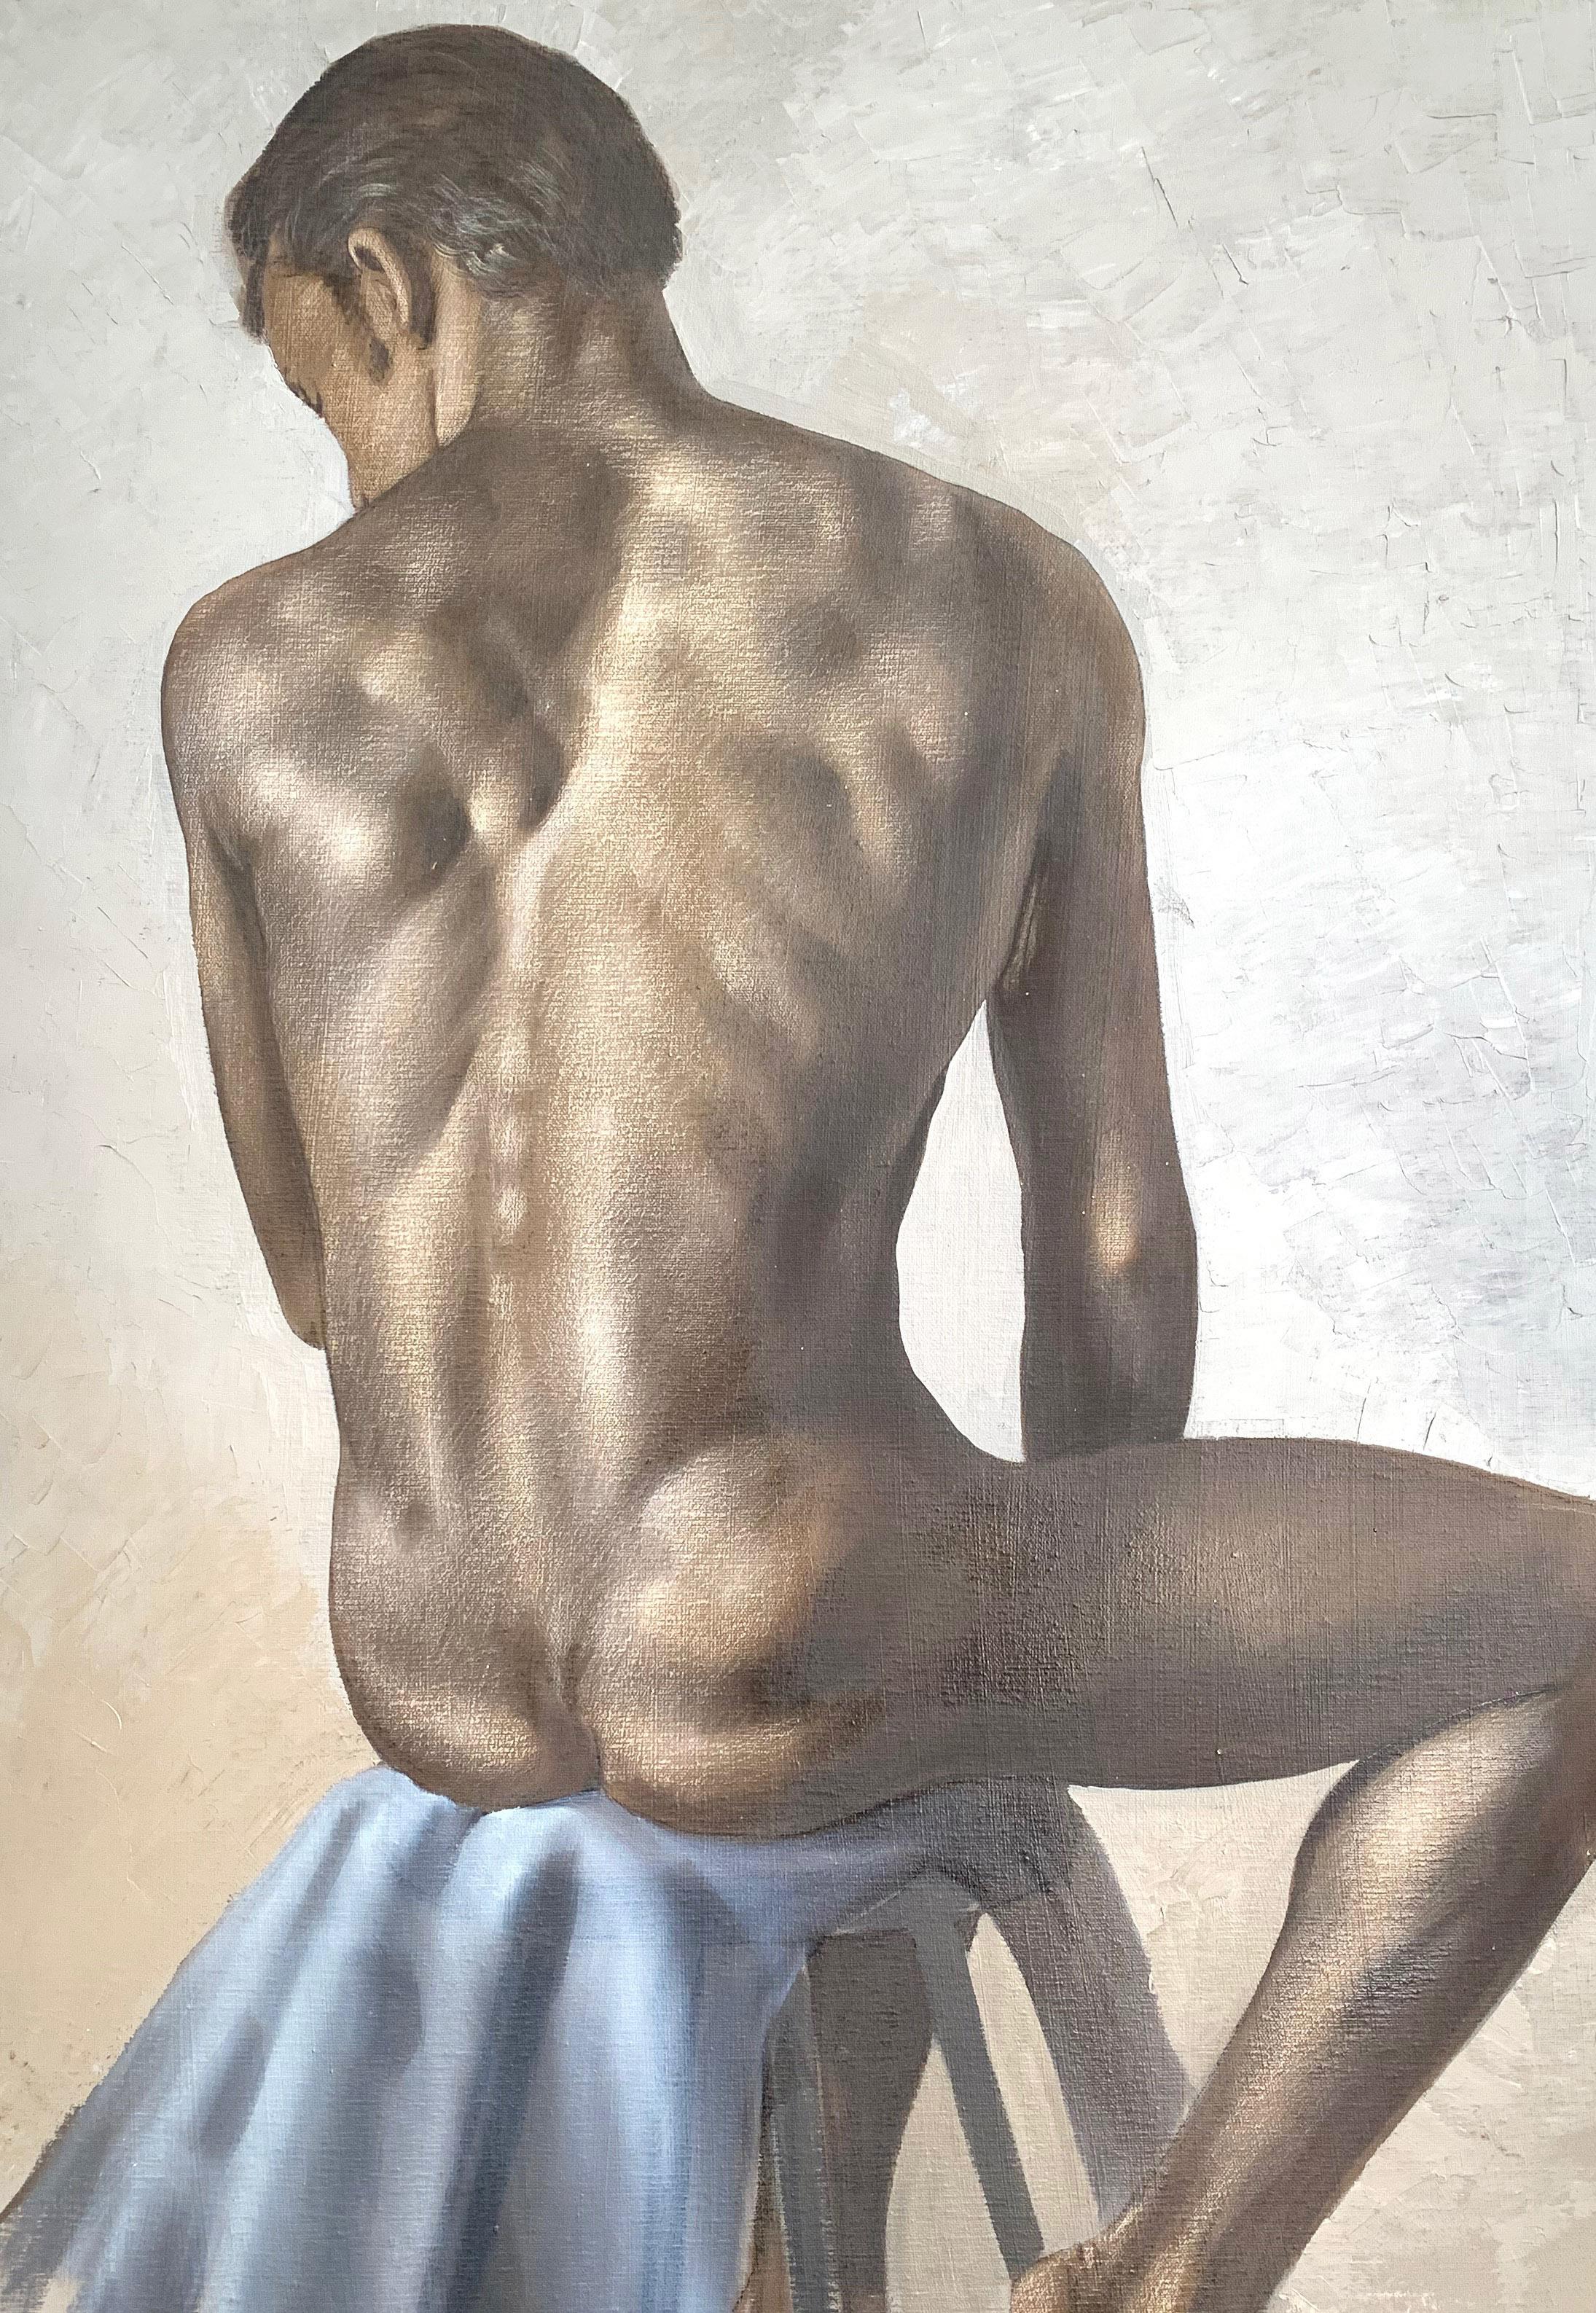 Subdued in palette but gorgeous in subtle detail, this painting of a seated male nude from behind captures the sensuality and beauty of the human figure. The painter, Roberto Lupetti, used fine brushwork for the figure, and an impasto technique for